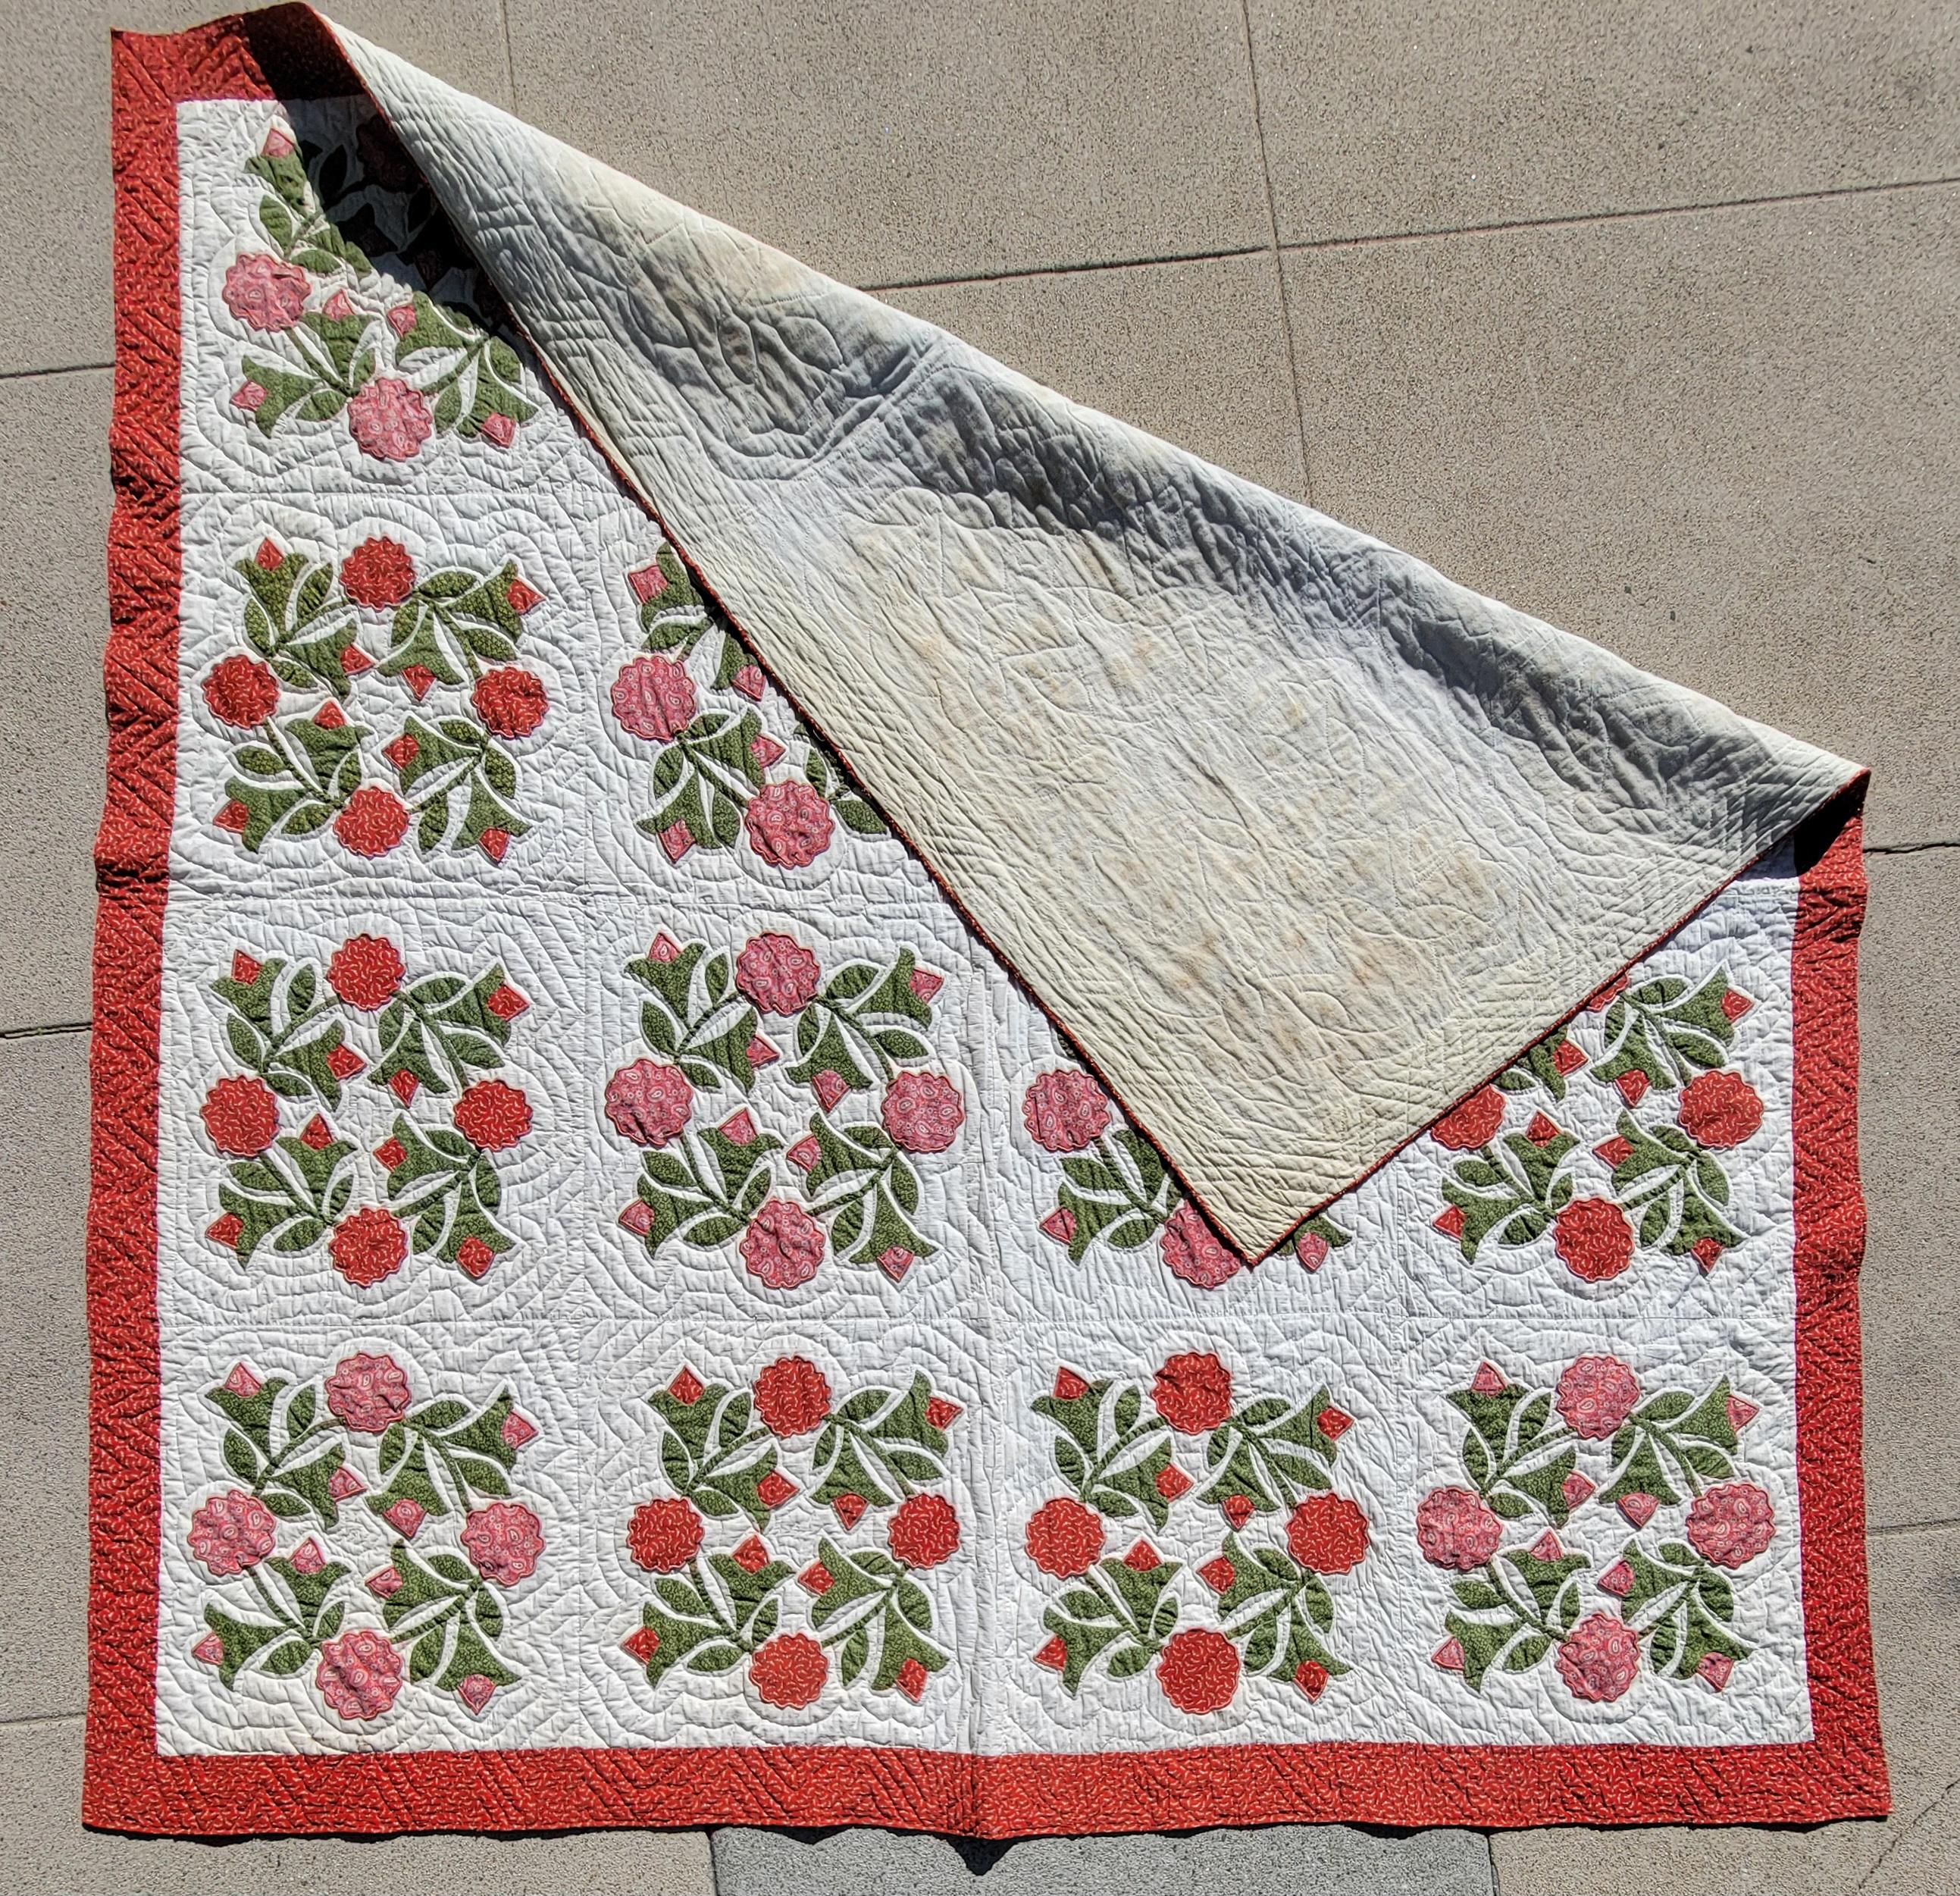 19Thc Wreath of roses  applique quilt from Pennsylvania in pristine condition.This quilt is finely appliqued & nice quilting.